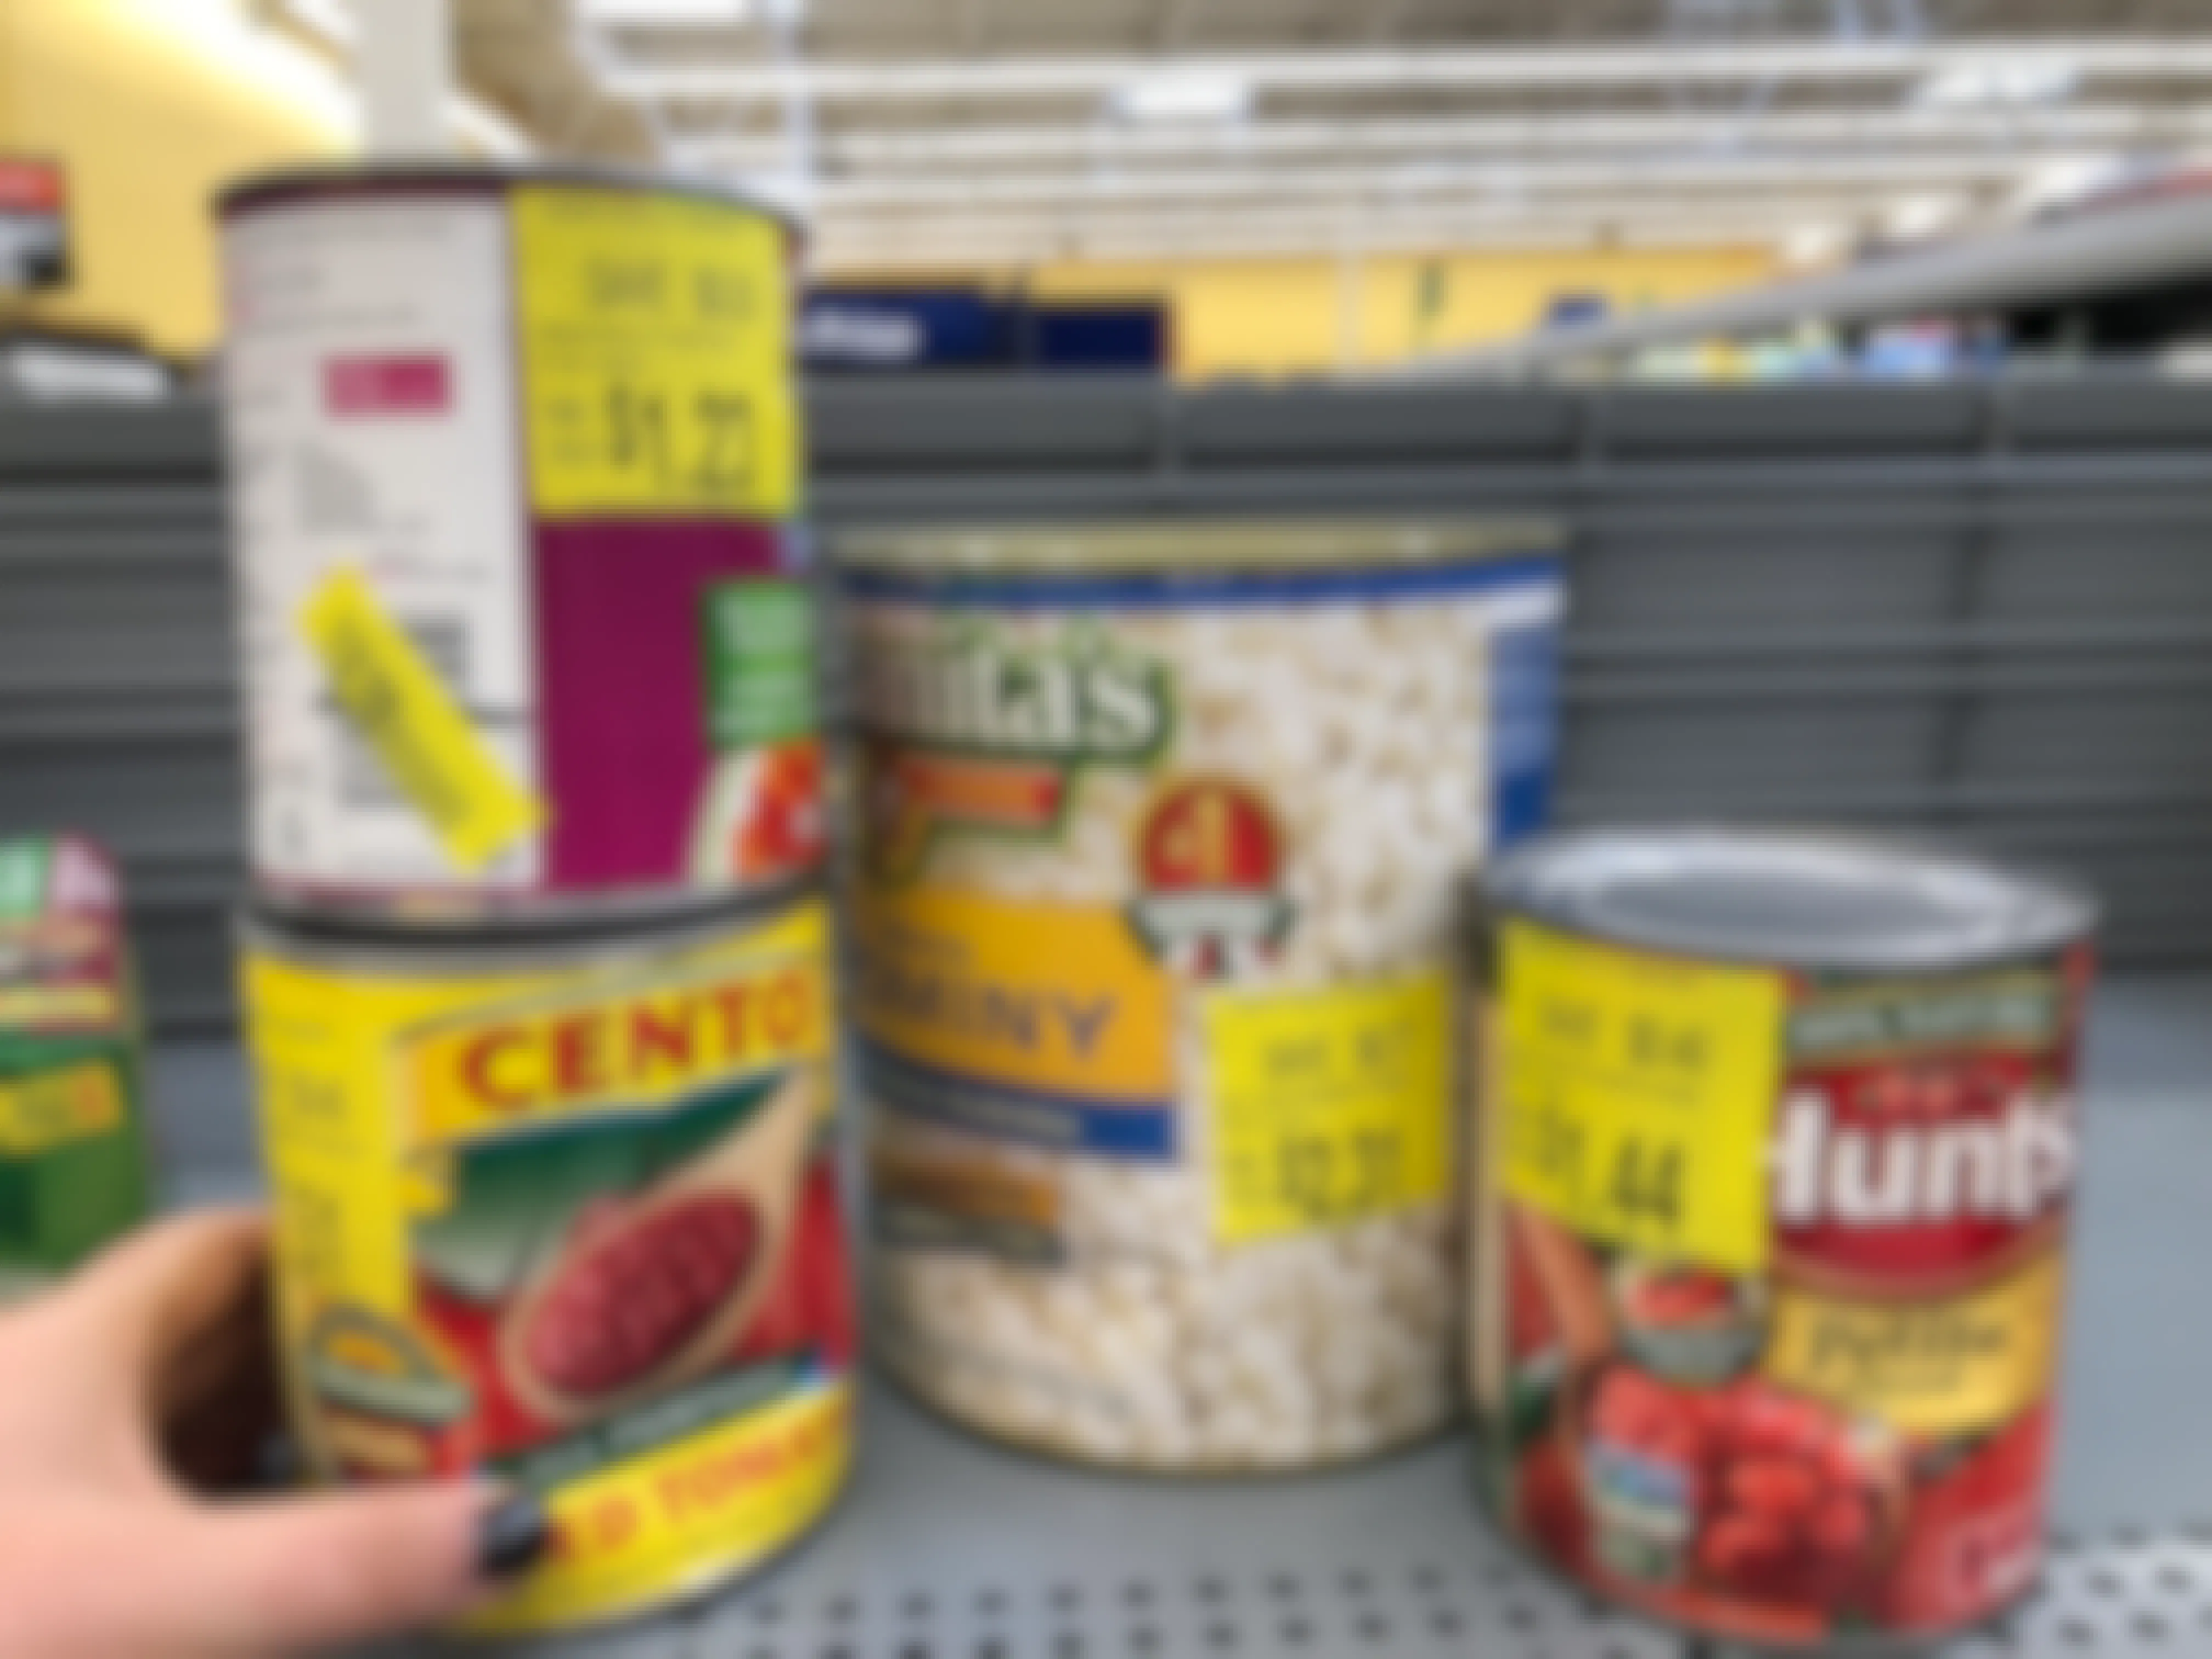 person looking at dented canned goods in walmart clearance aisle